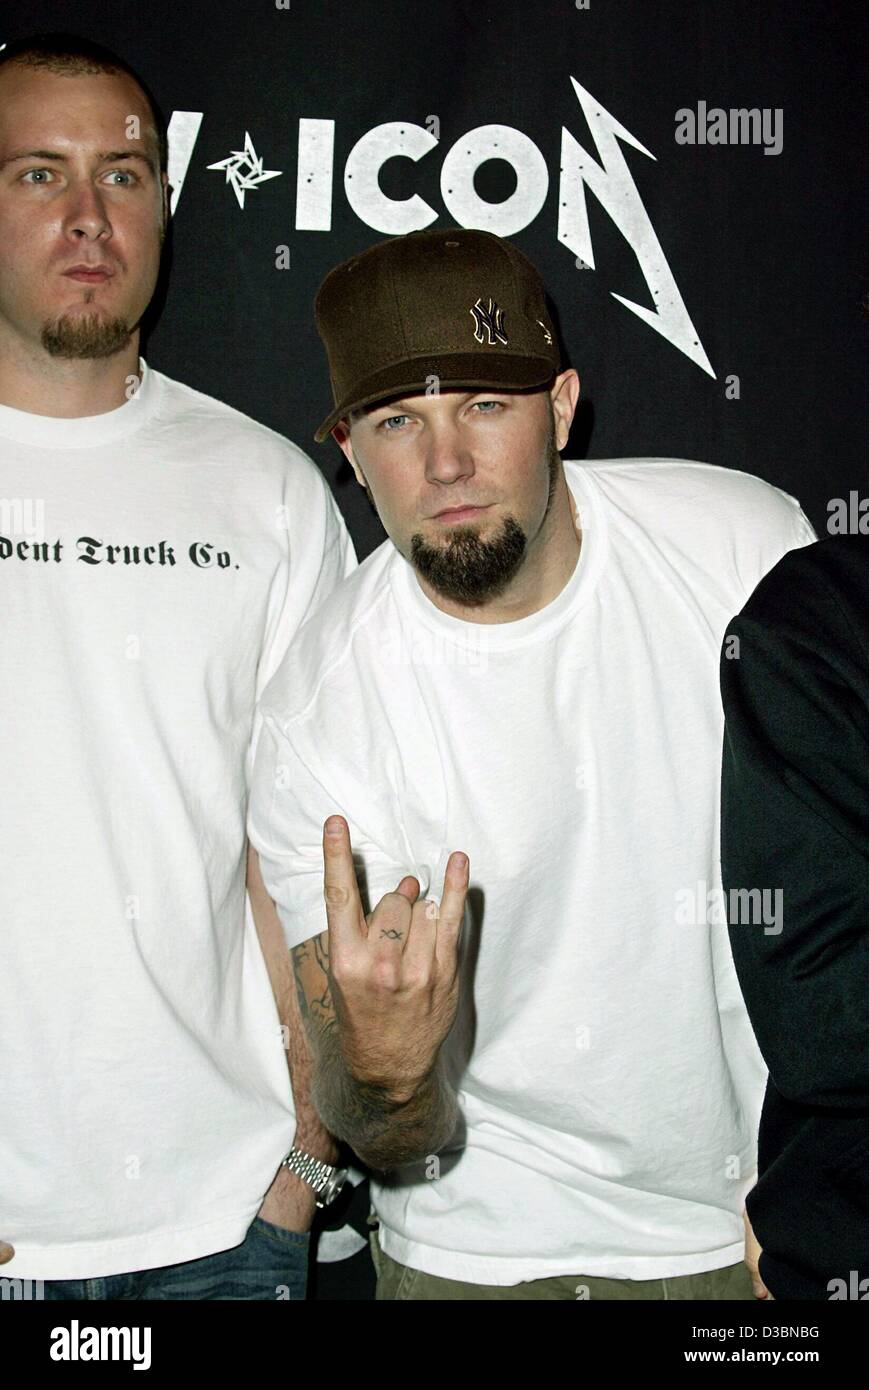 (dpa) - Fred Durst, the singer of the group Limp Bizkit, gestures during the MTV Icon event in Los Angeles, 3 May 2003. Stock Photo